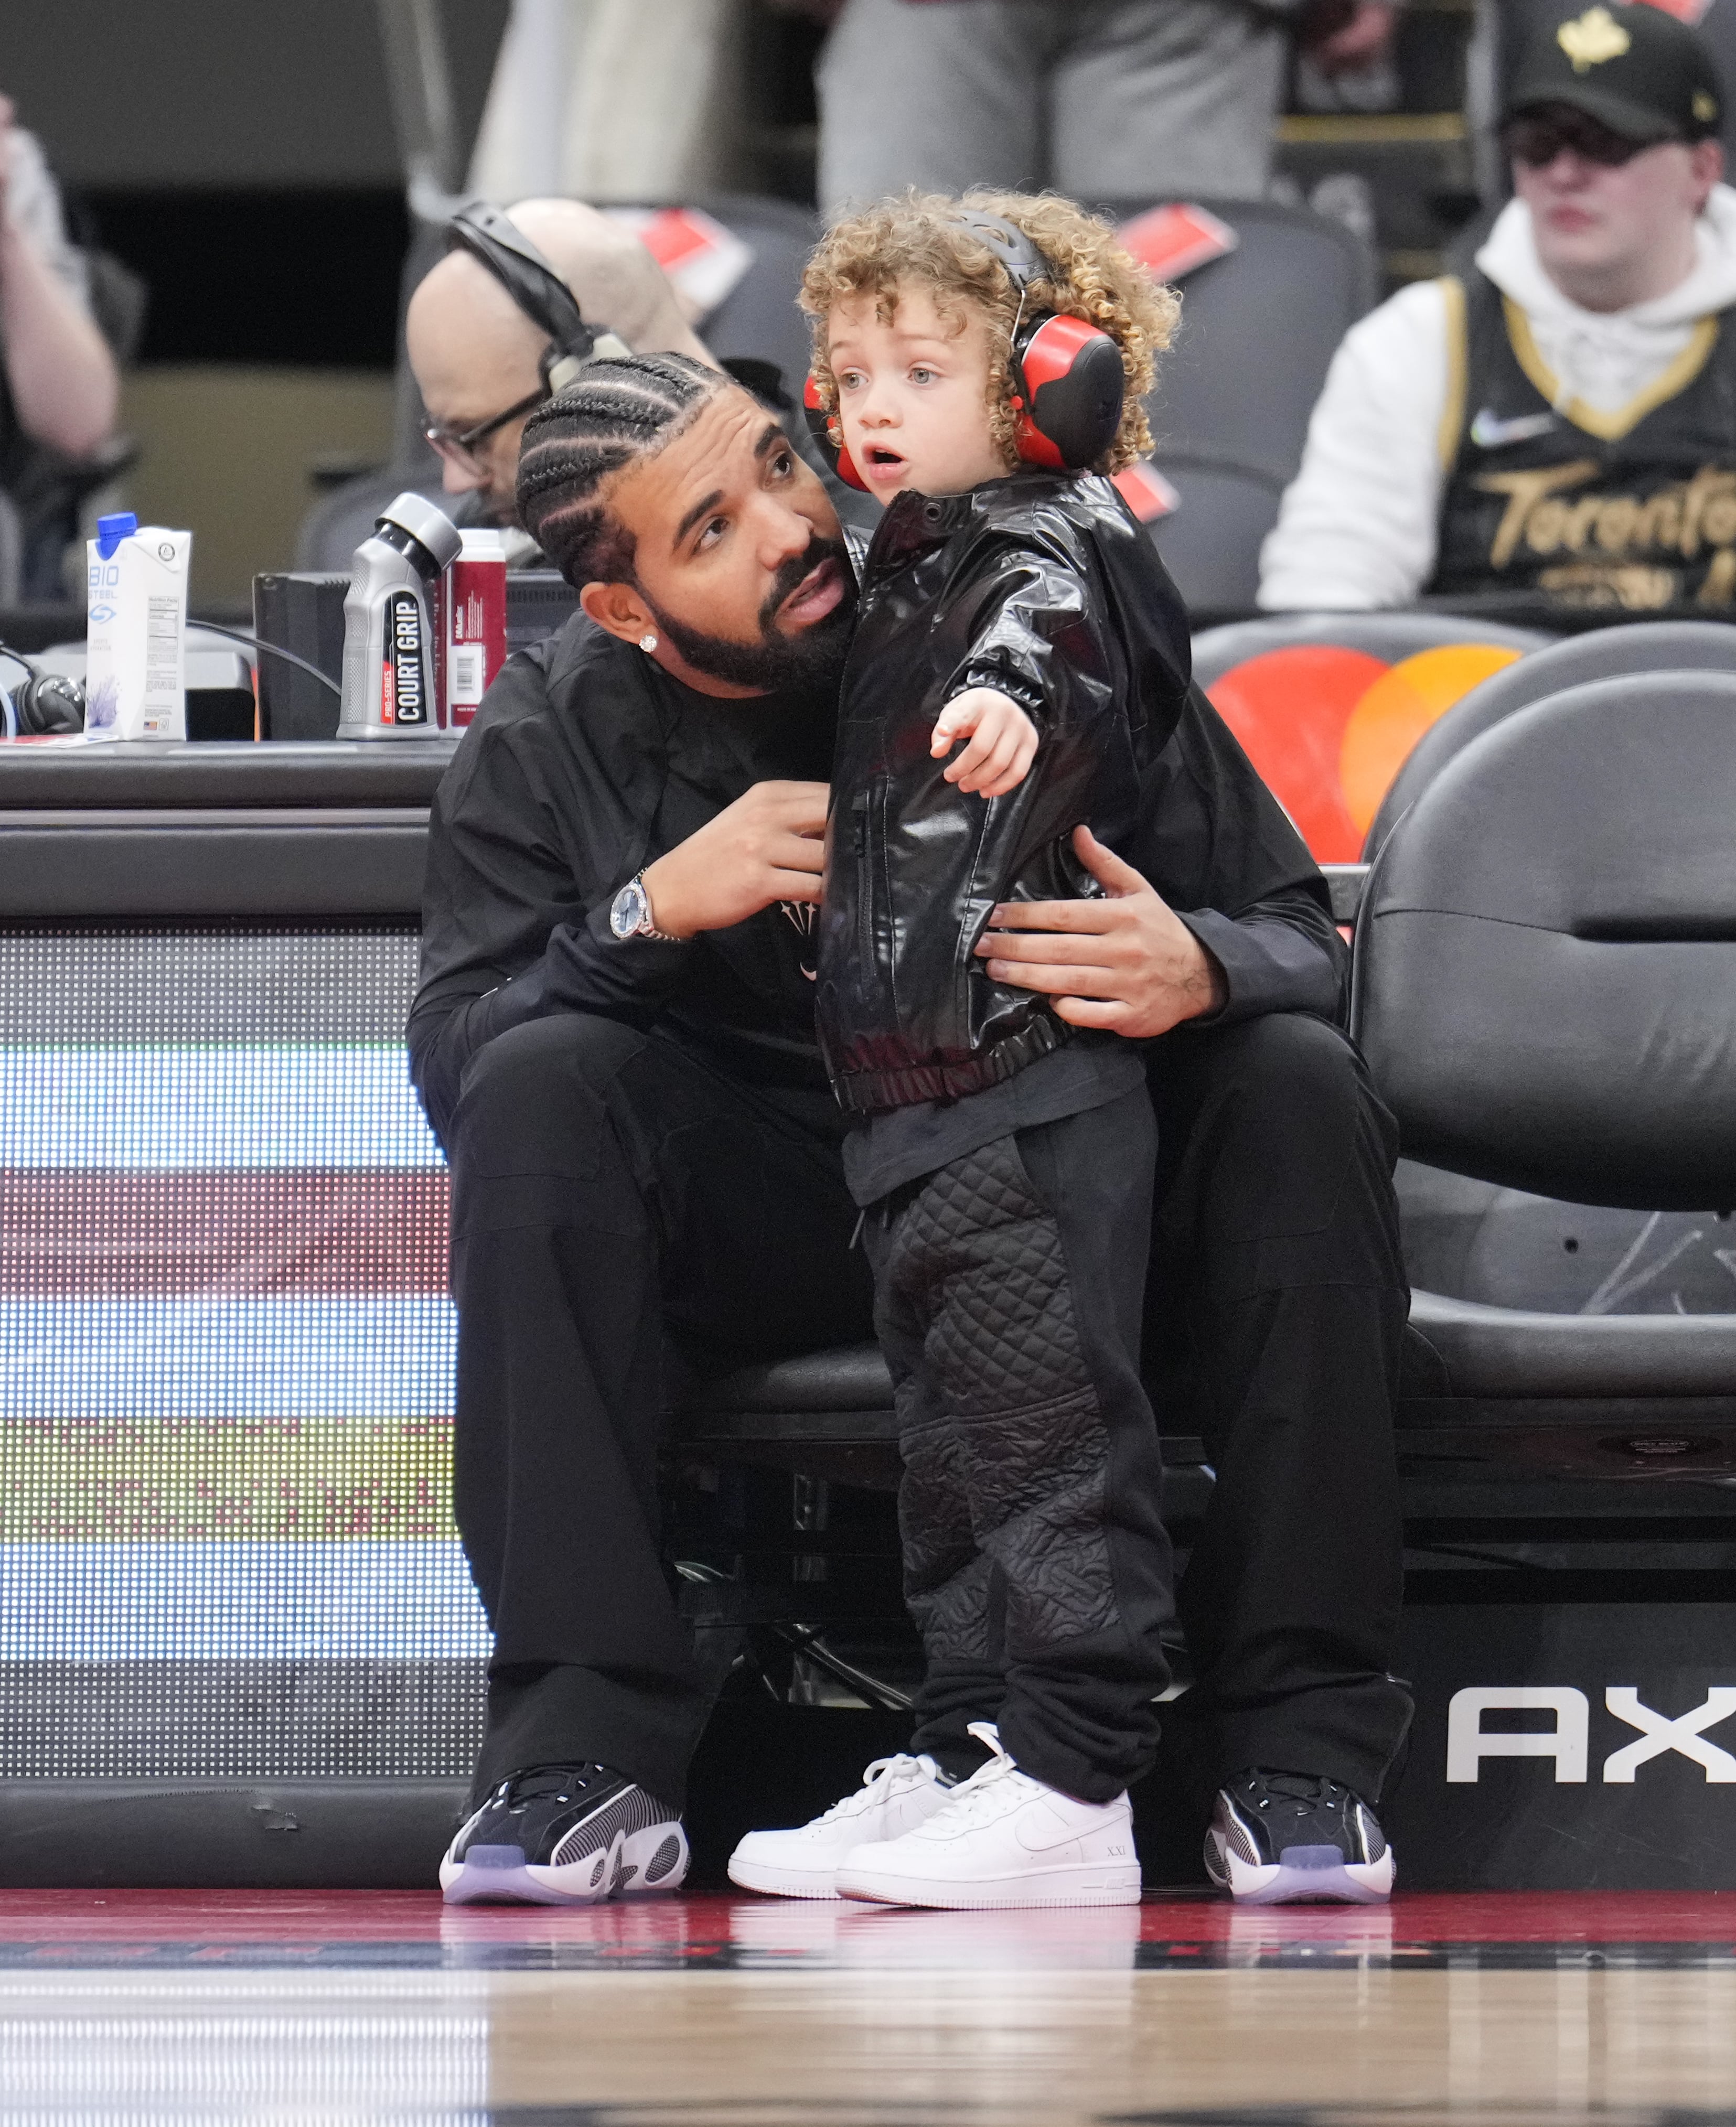 Sophie Brussaux: 6 Things to Know About the Mother of Drake's Son